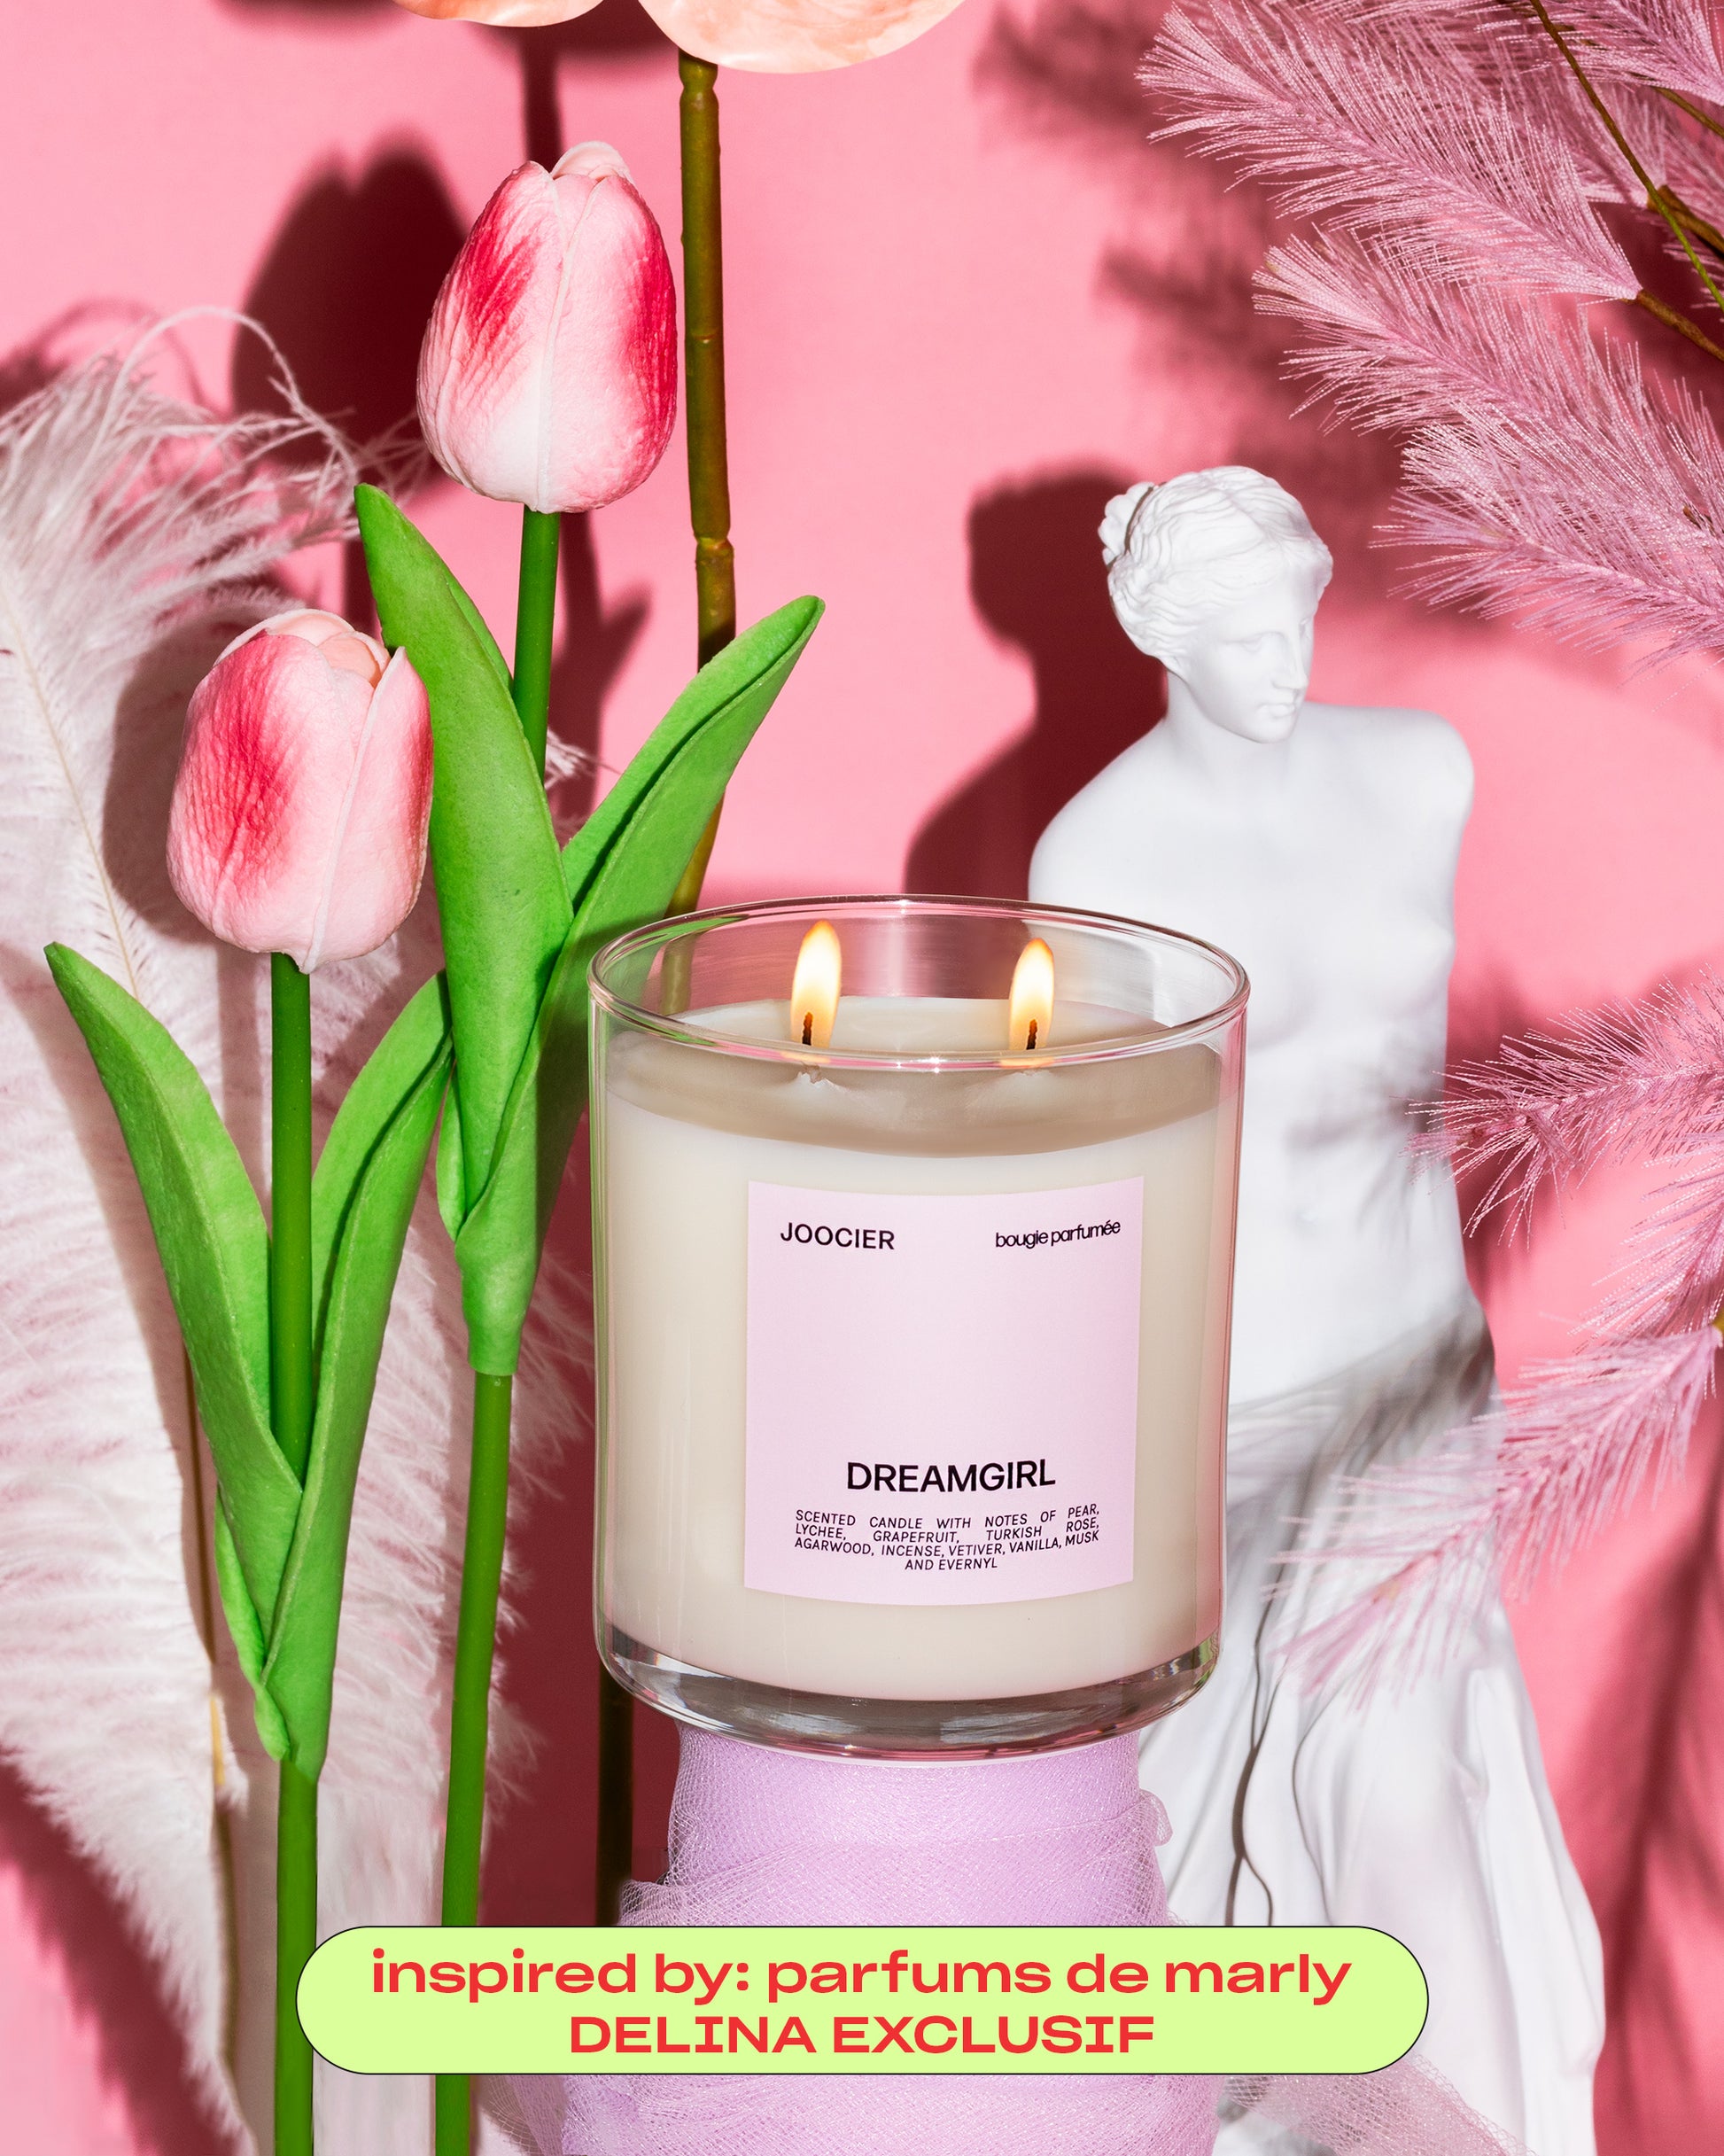 Delina dupe candle. A candle that smells like parfums de marly Delina Exclusive. Pear, lychee, grapefruit, Turkish rose, Starwood, incense, vetiver, vanilla, musk scented candle. A fruity incense candle by Joocier. A gourmand scent that is also warm and complex.